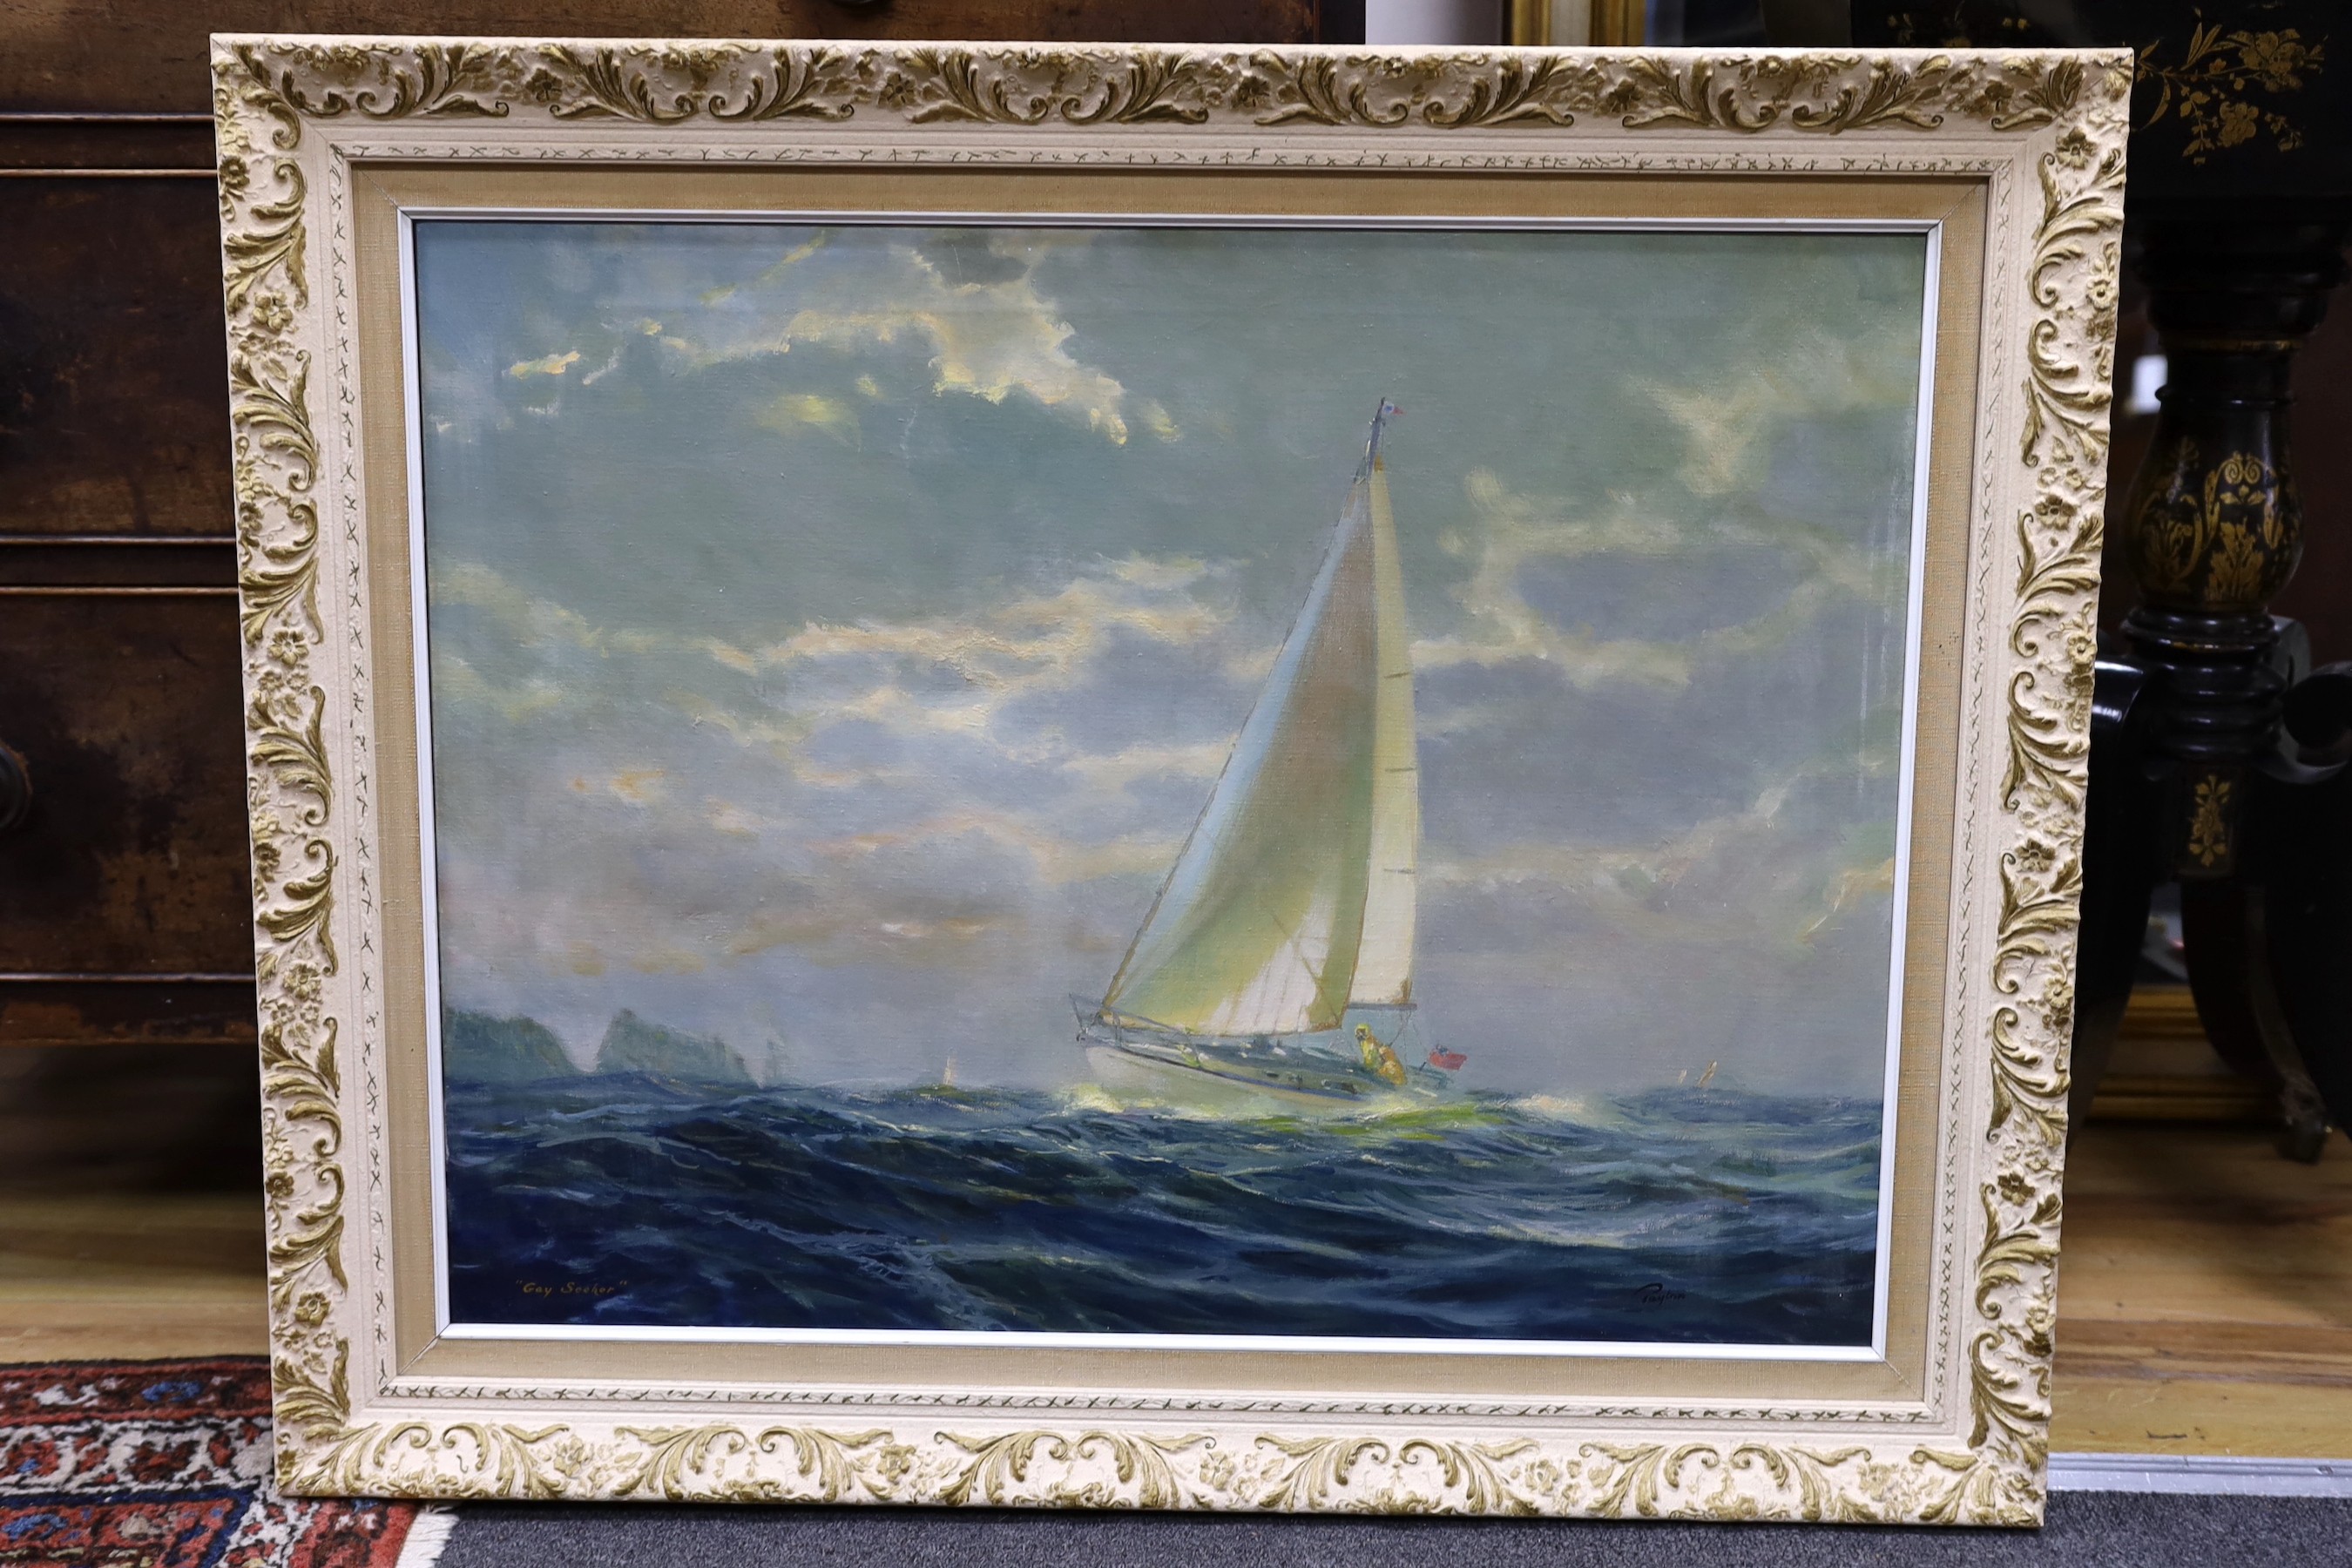 Payton, oil on canvas, 'Gay Seeker' - yacht at sea, signed, 49 x 65cm.